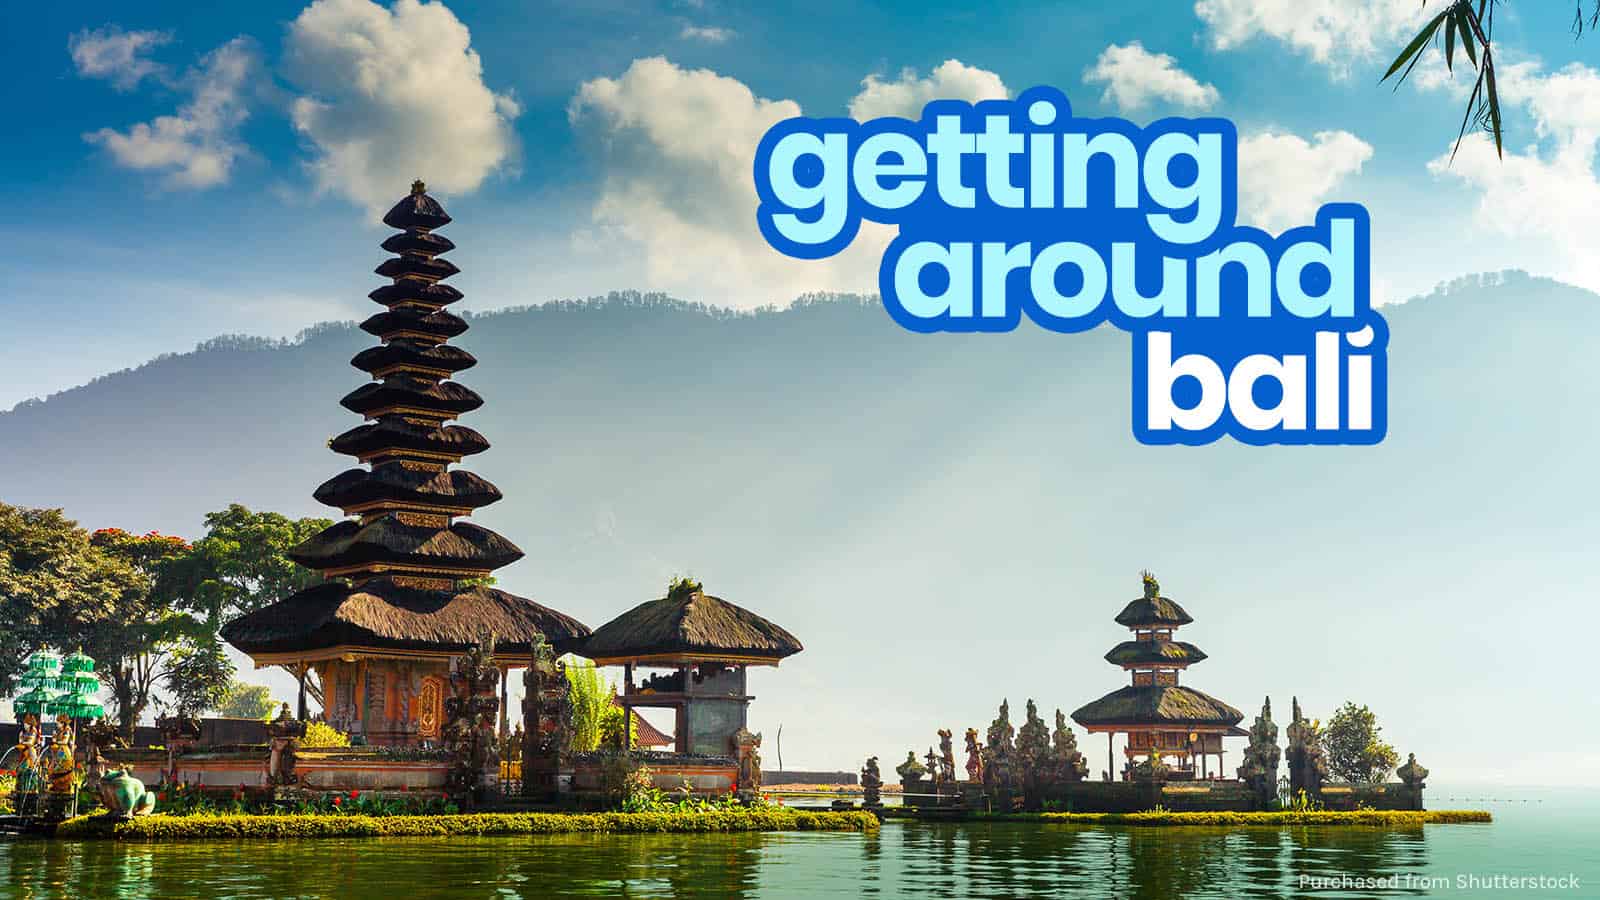 HOW TO GET AROUND BALI: By Bus, Taxi, Group Tour & More